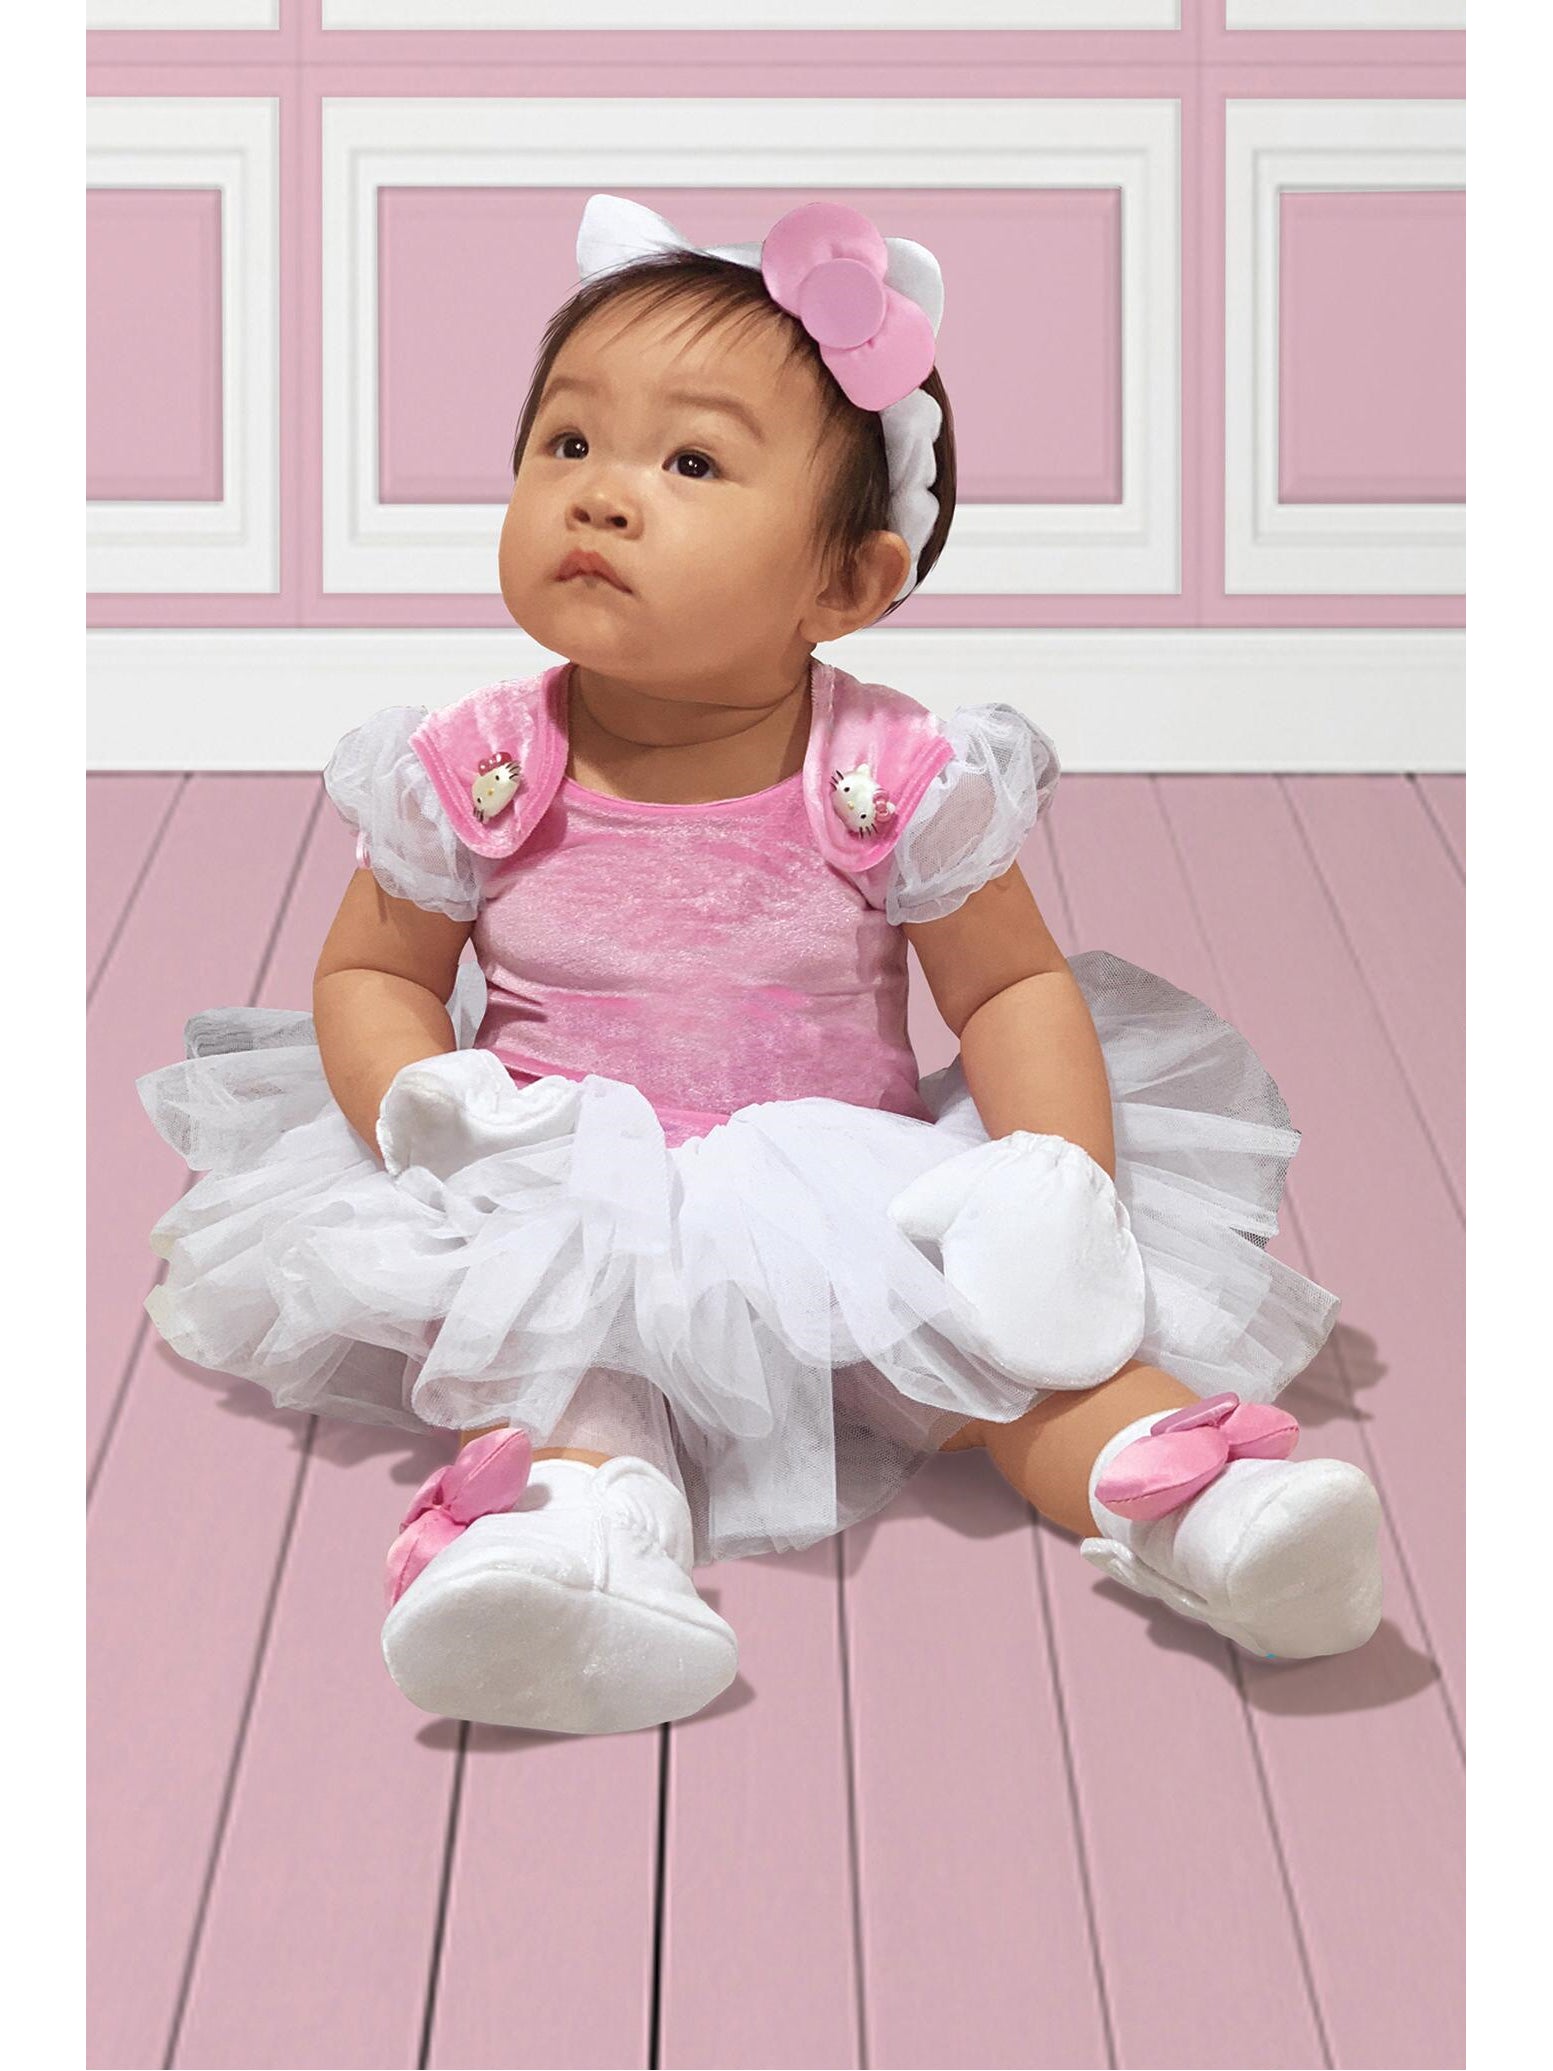 hello kitty dresses for toddlers